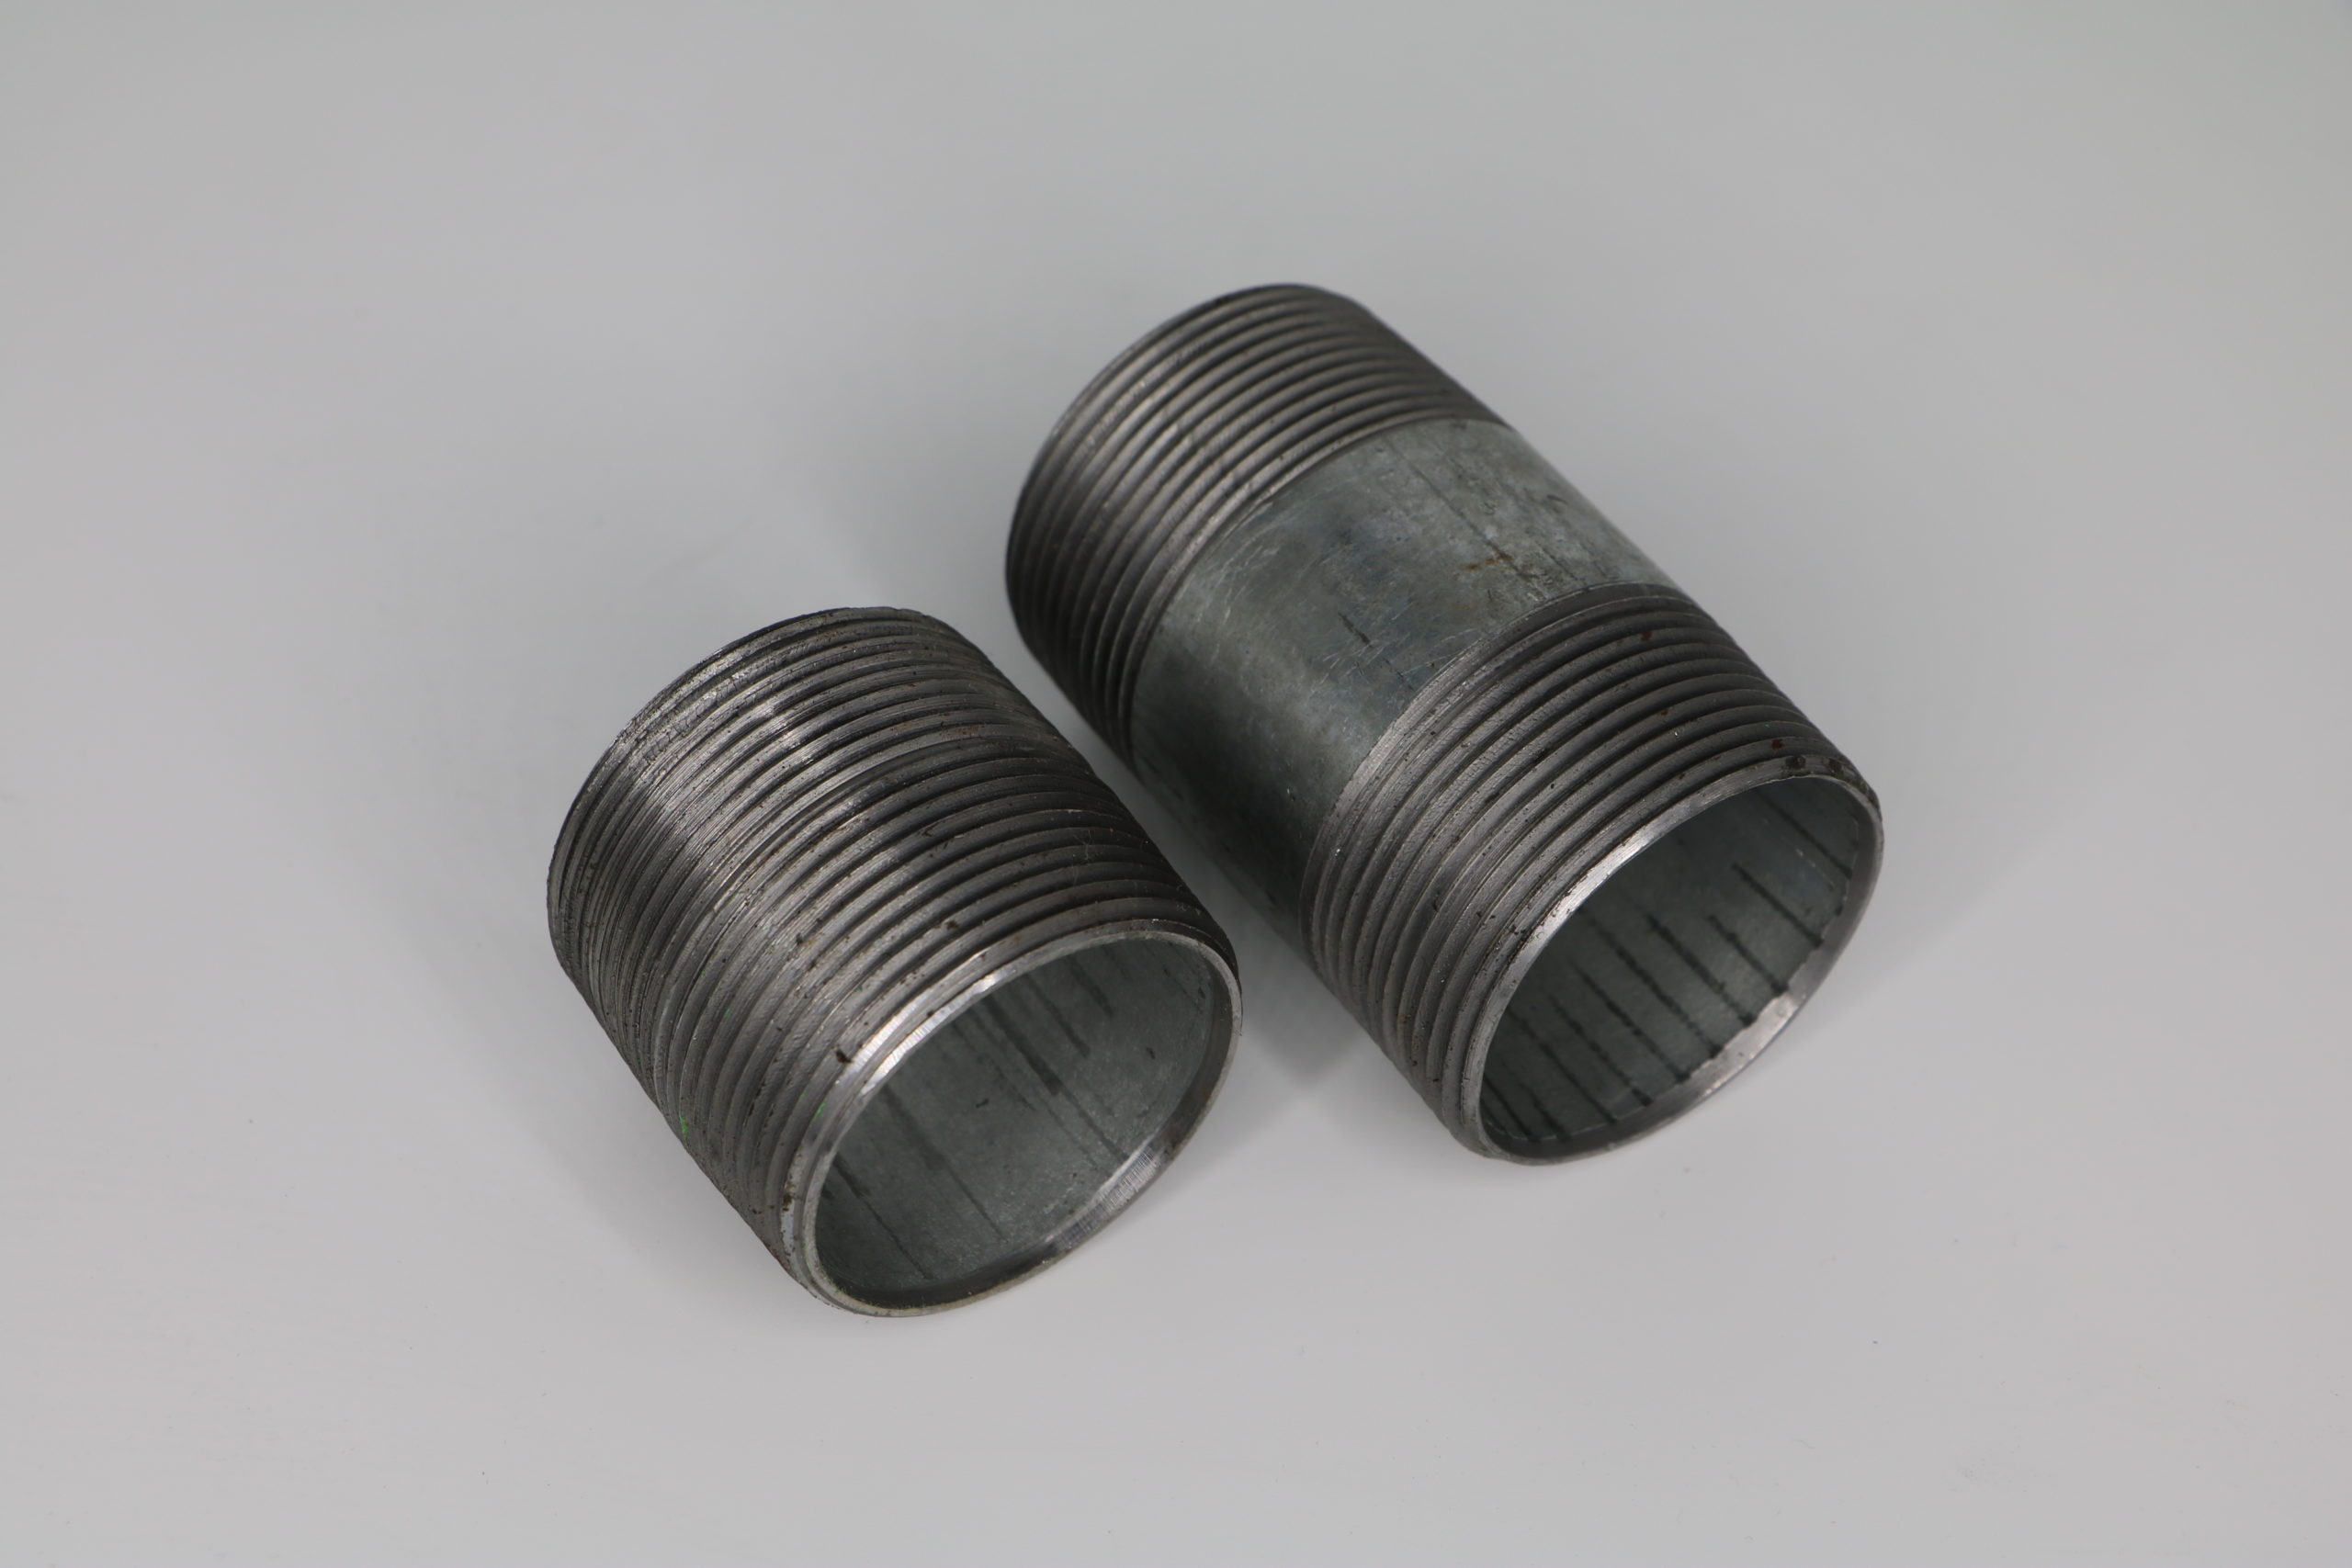 1-1/2" Steel Pipe Adaptor made with galvanized steel for abrasive sandblasting applications